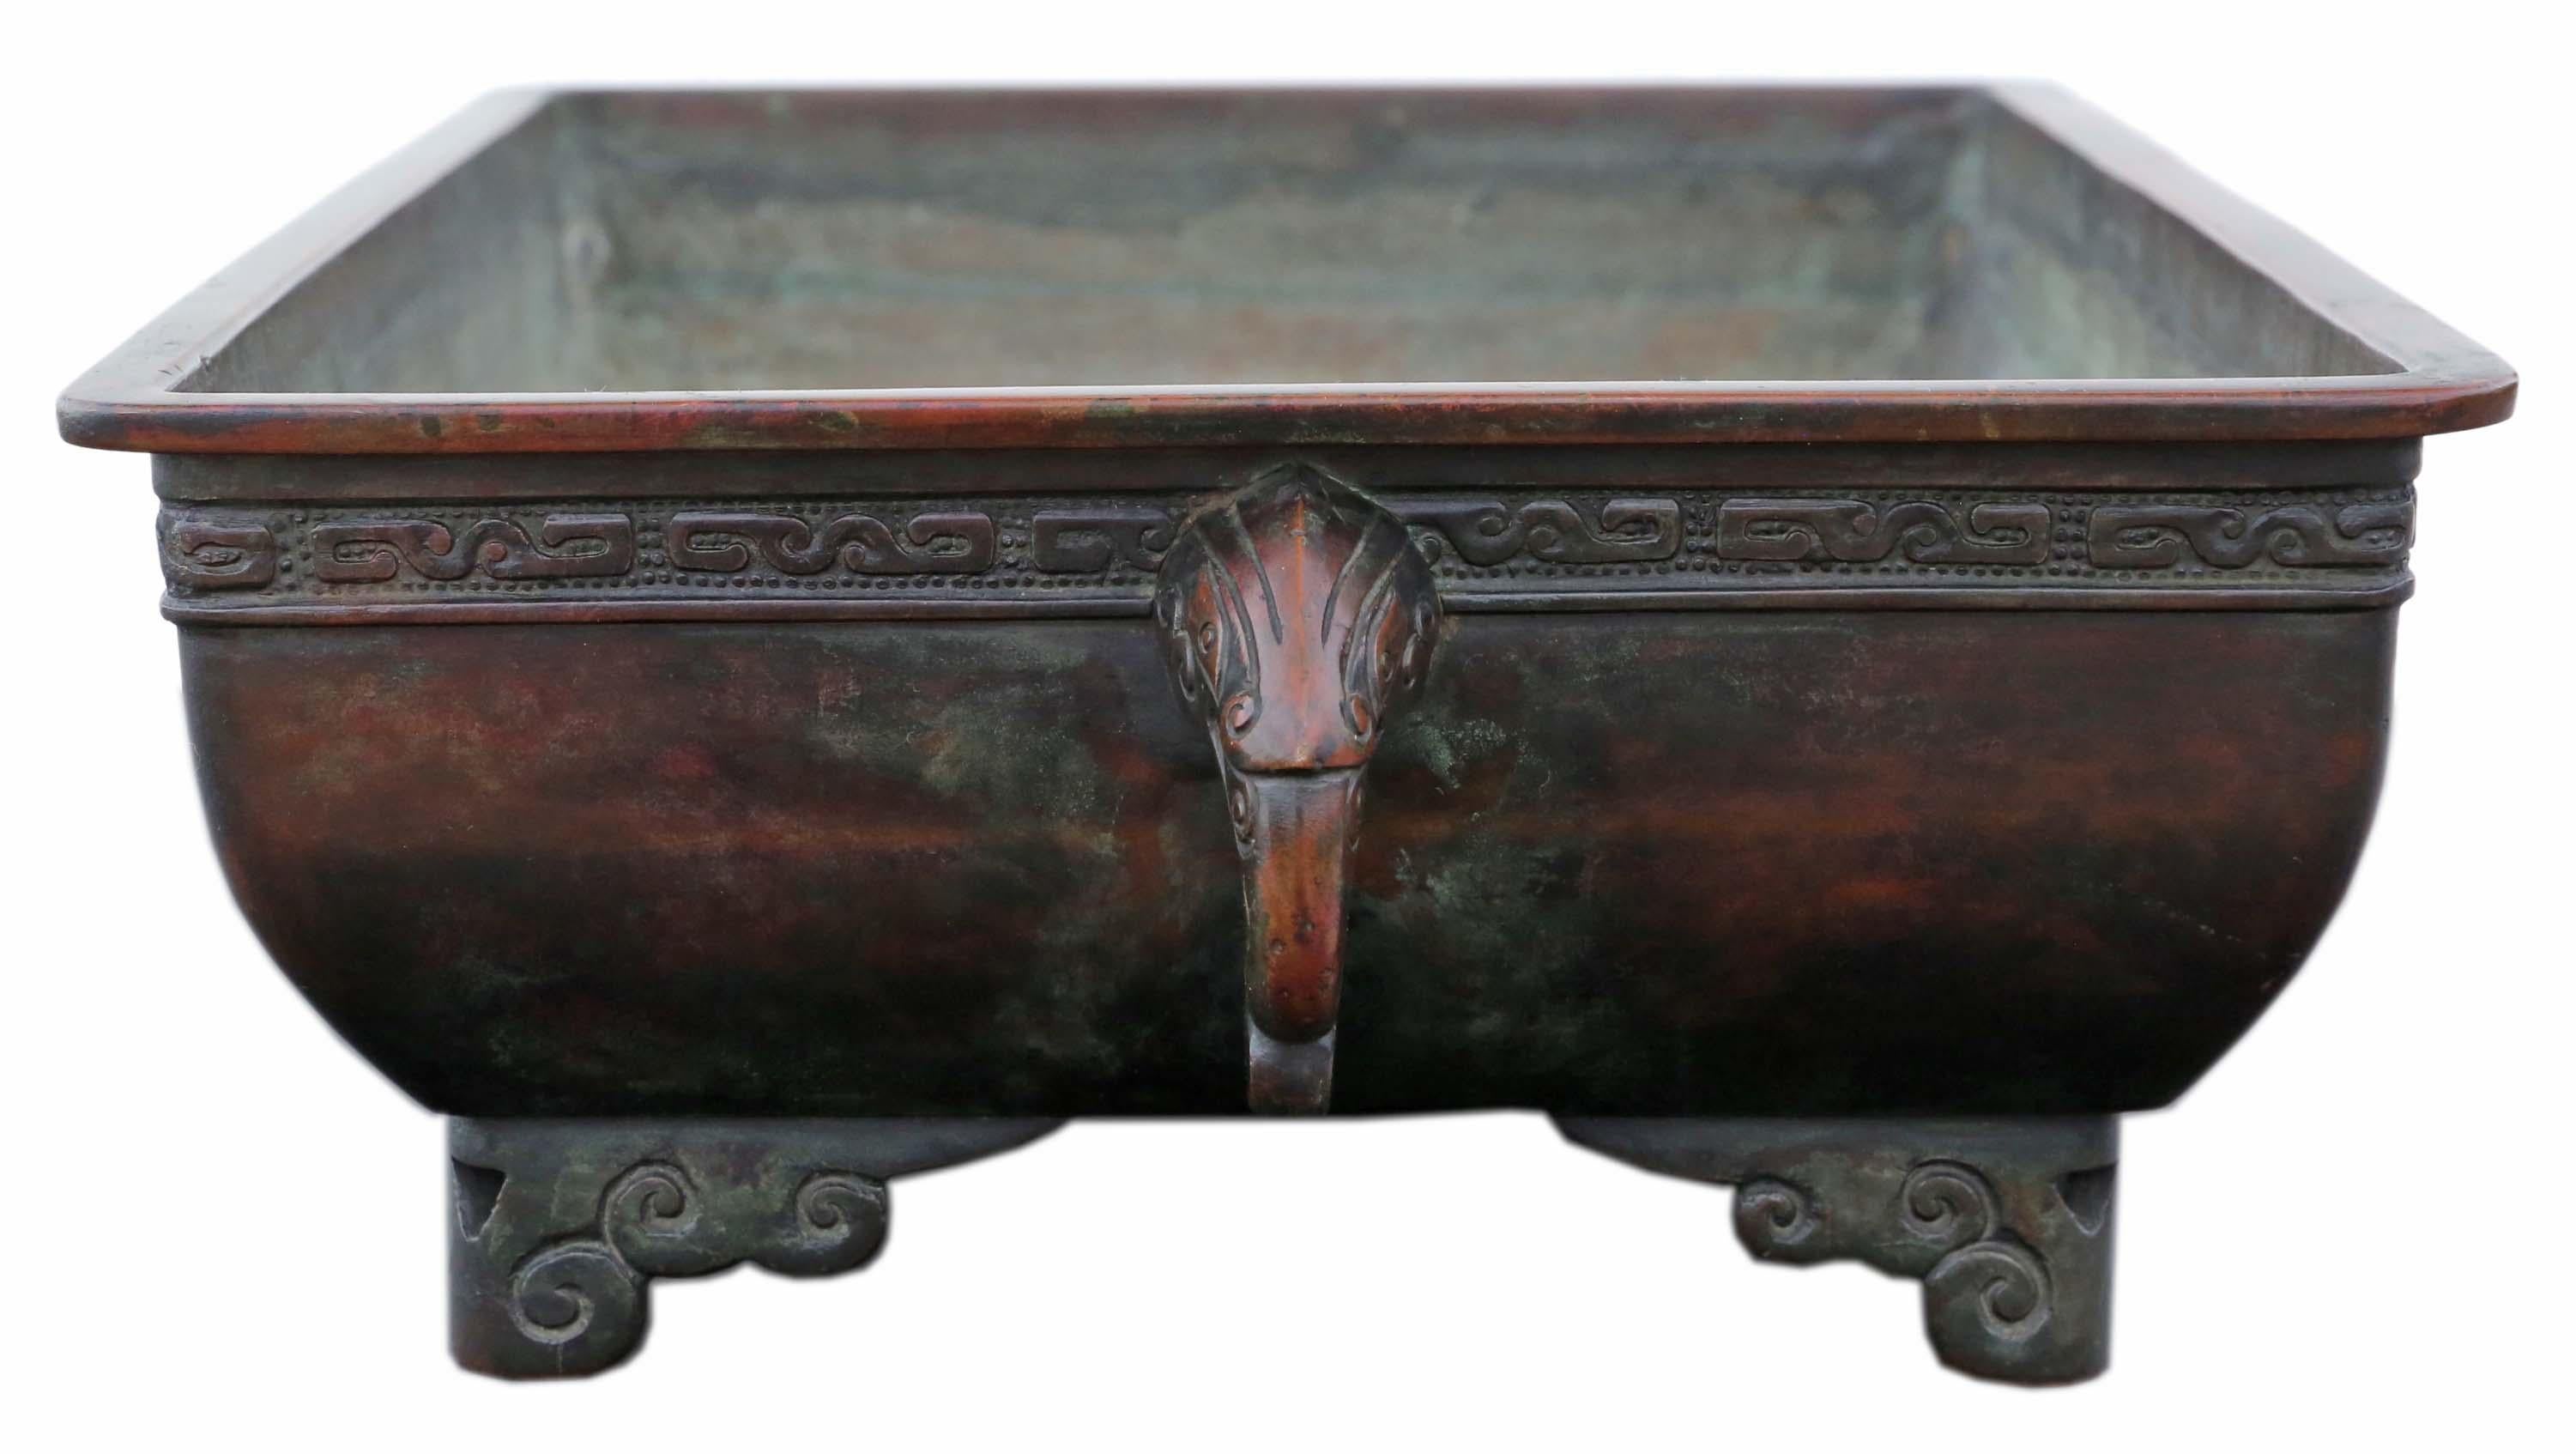 Antique Oriental Japanese Bronze Bowl Planter Jardinière - Exquisite Meiji Period Piece!

This remarkable bronze bowl planter jardinière, dating back to the Meiji Period circa 1880, embodies the artistry and elegance of Japanese craftsmanship.